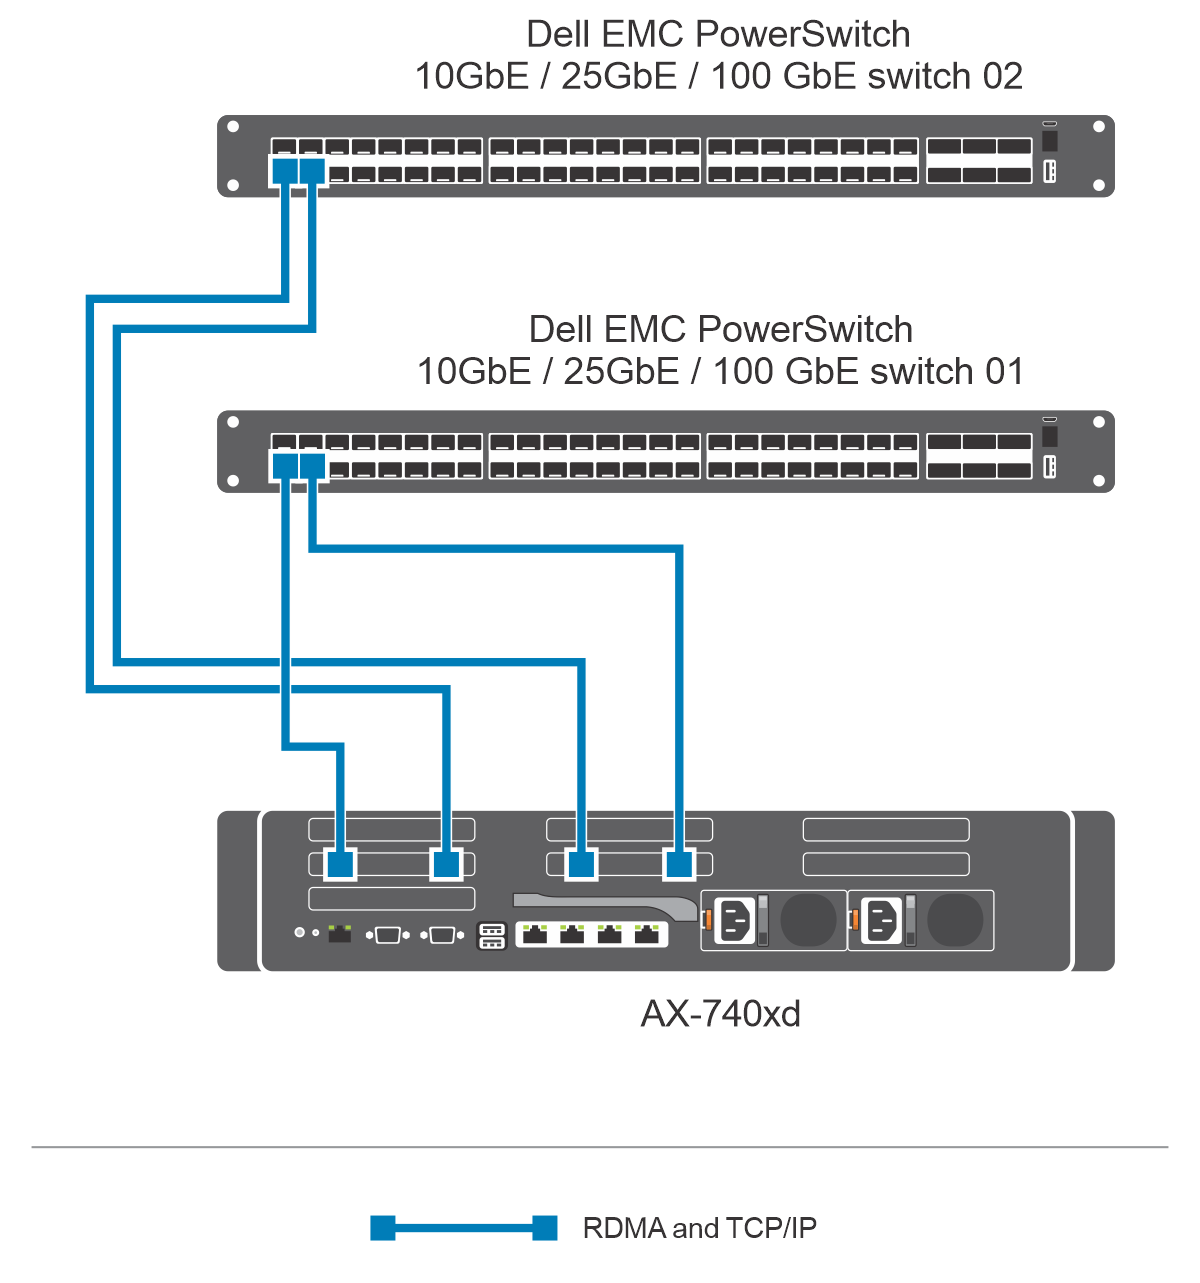 Figure illustrating fully converged network topology with four NIC ports